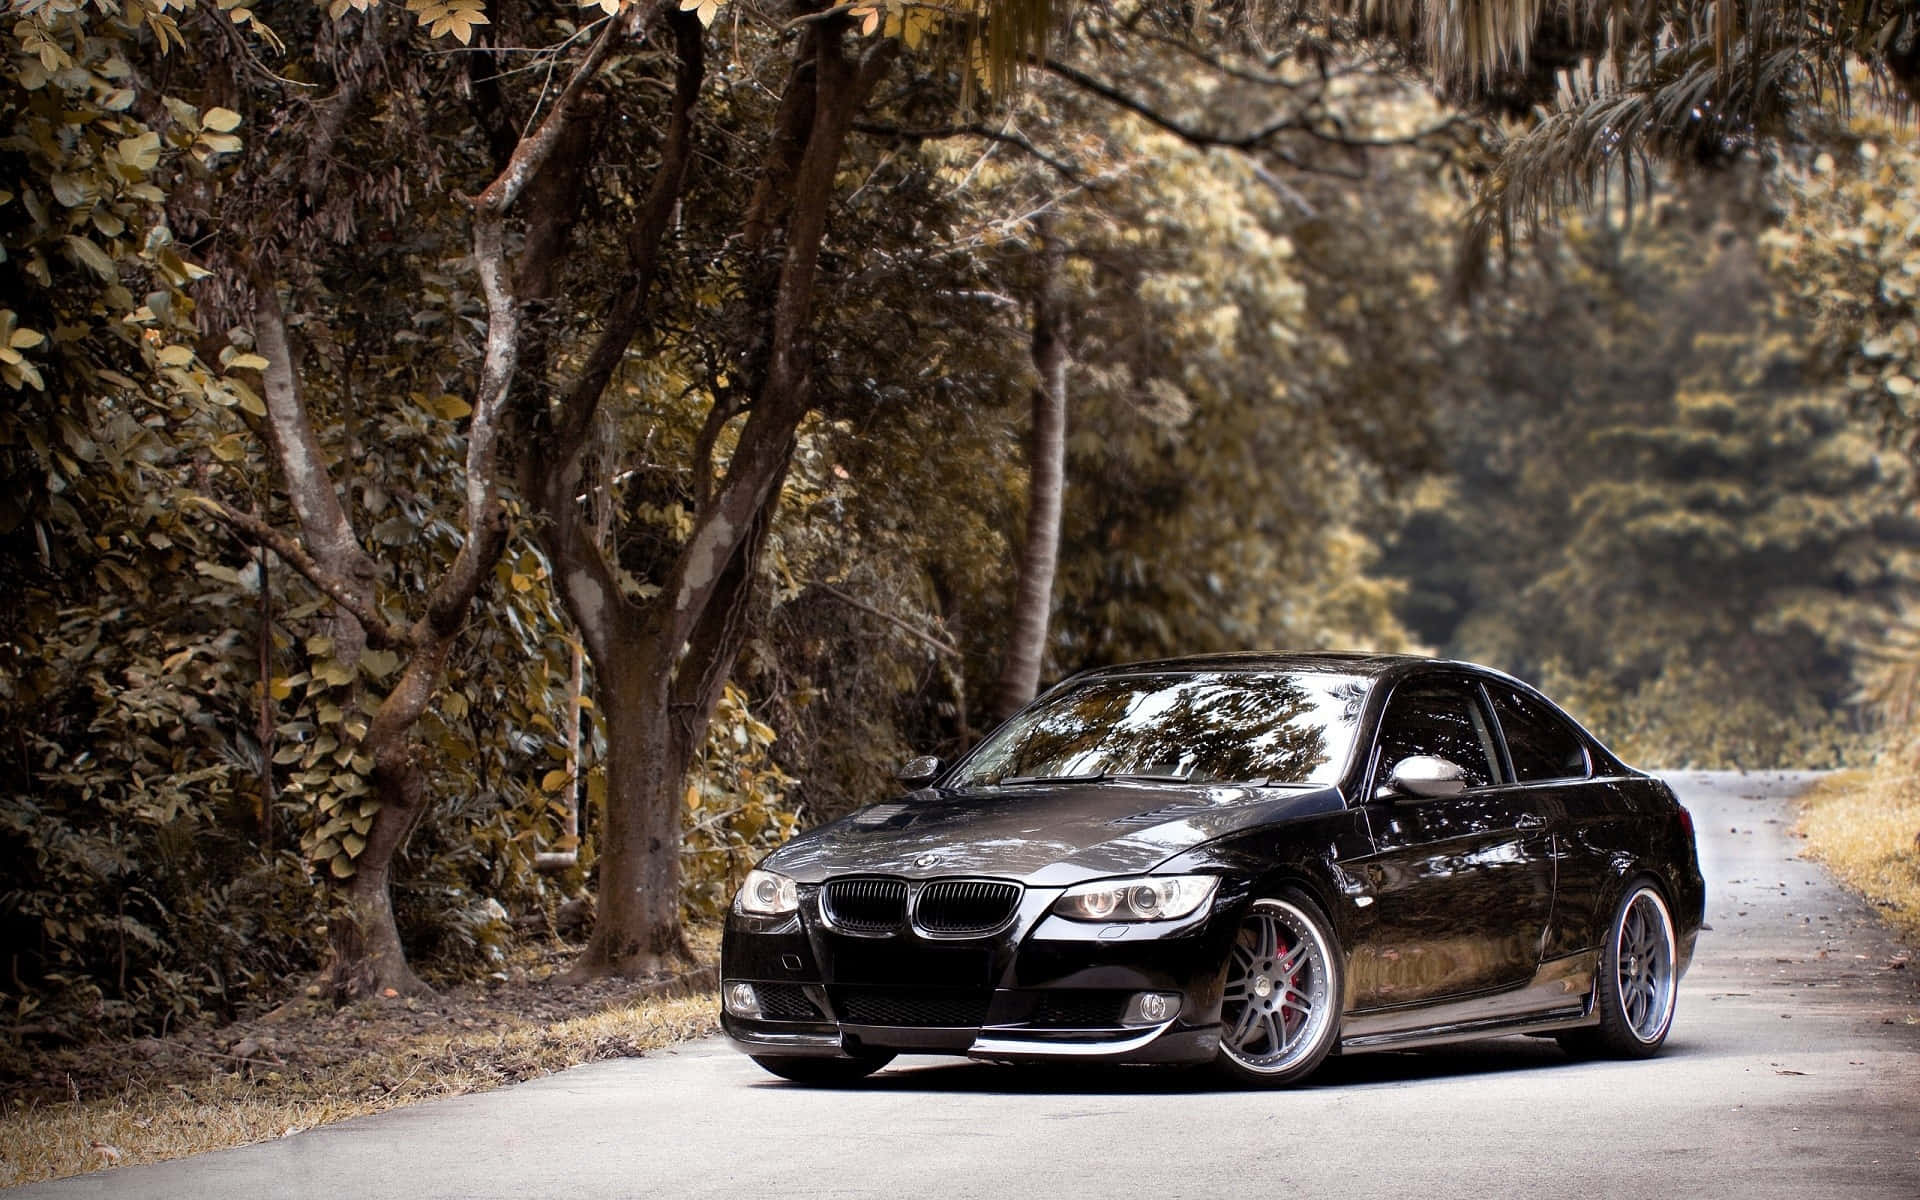 Enjoy a High-End Driving Experience with the BMW 328 Wallpaper